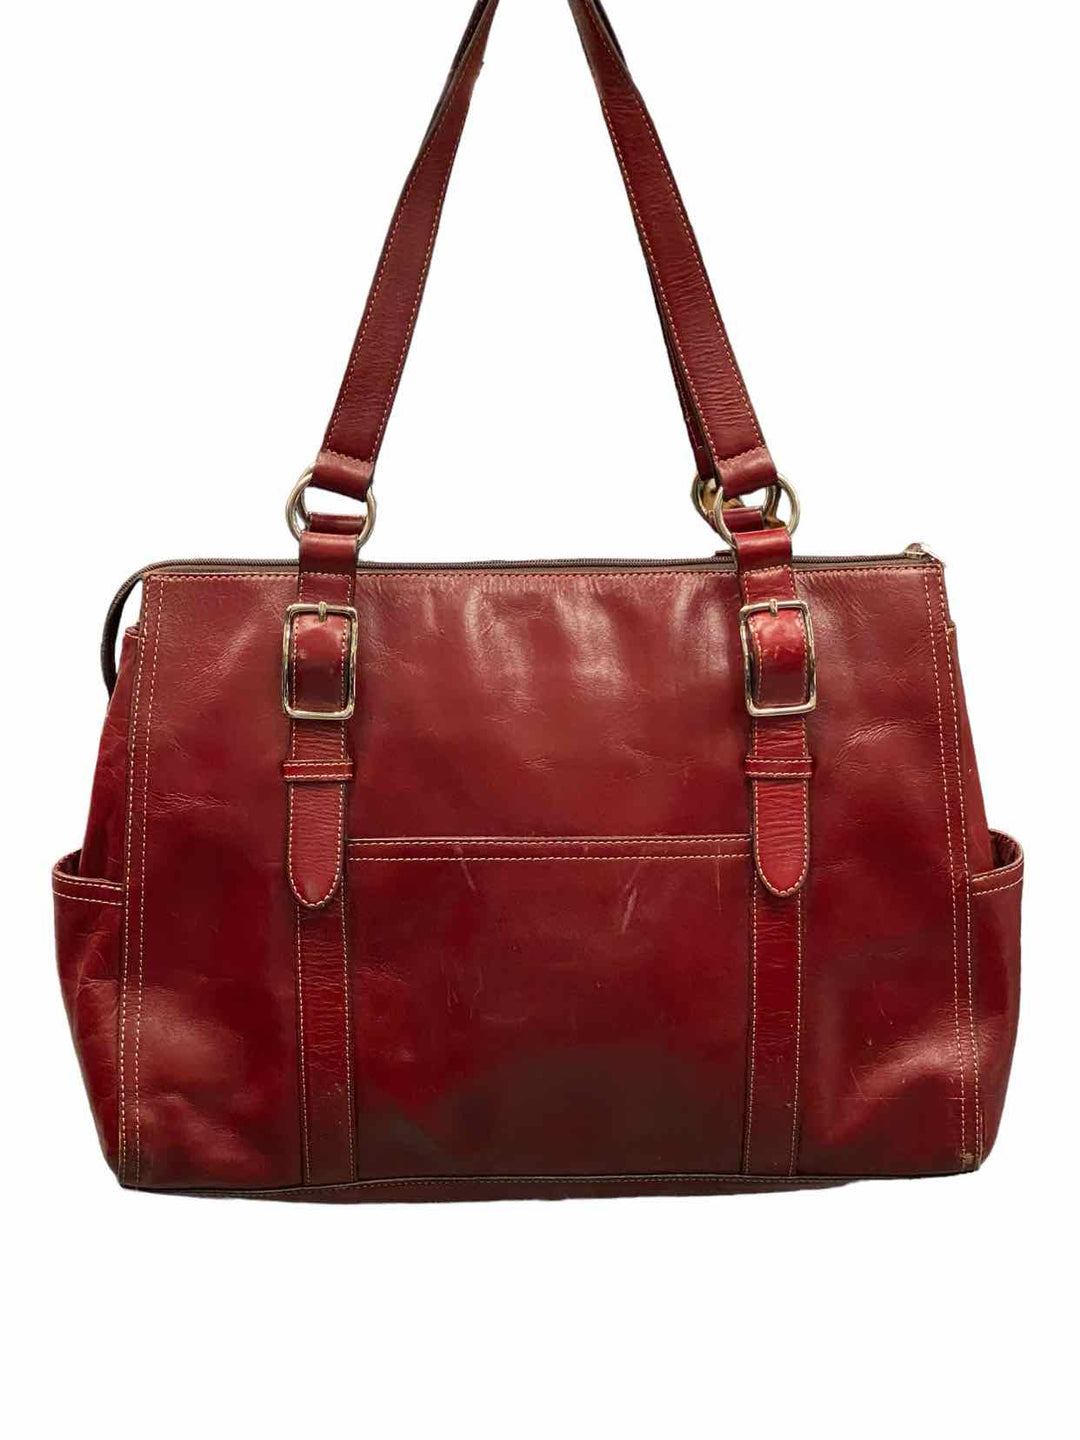 Fossil Red Purse